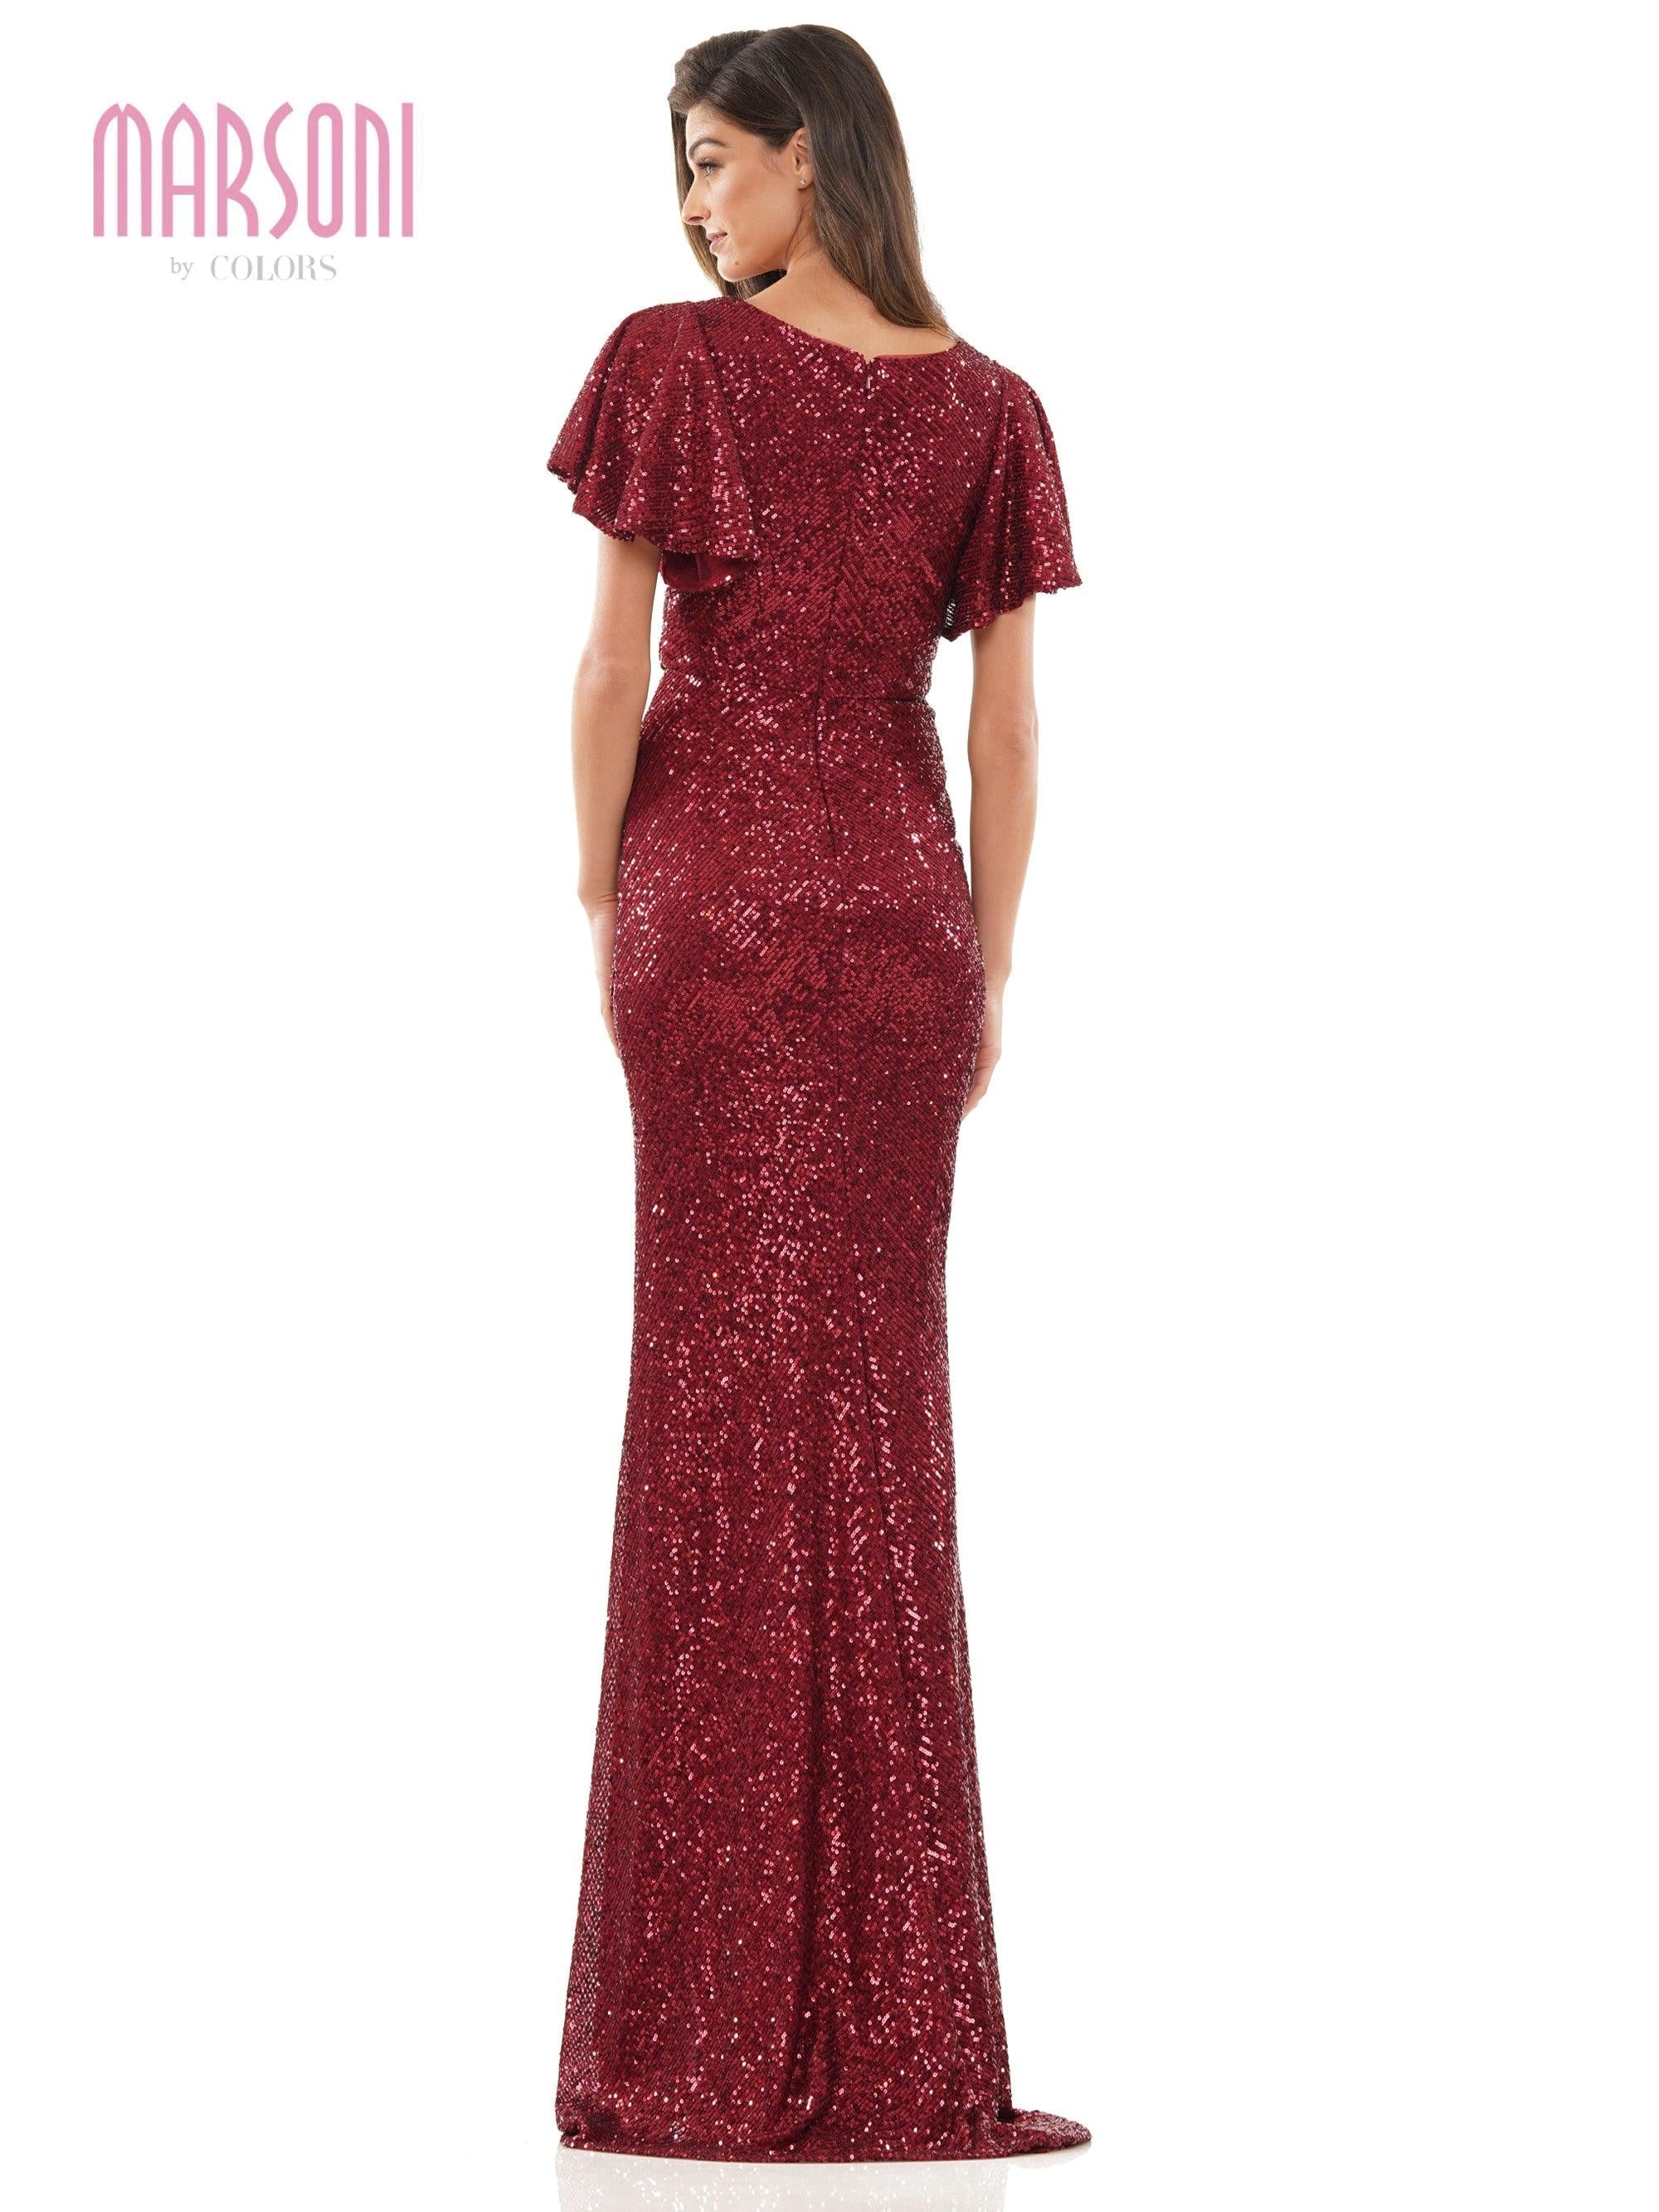 Marsoni Long Formal Mother of the Bride Dress M318 - The Dress Outlet